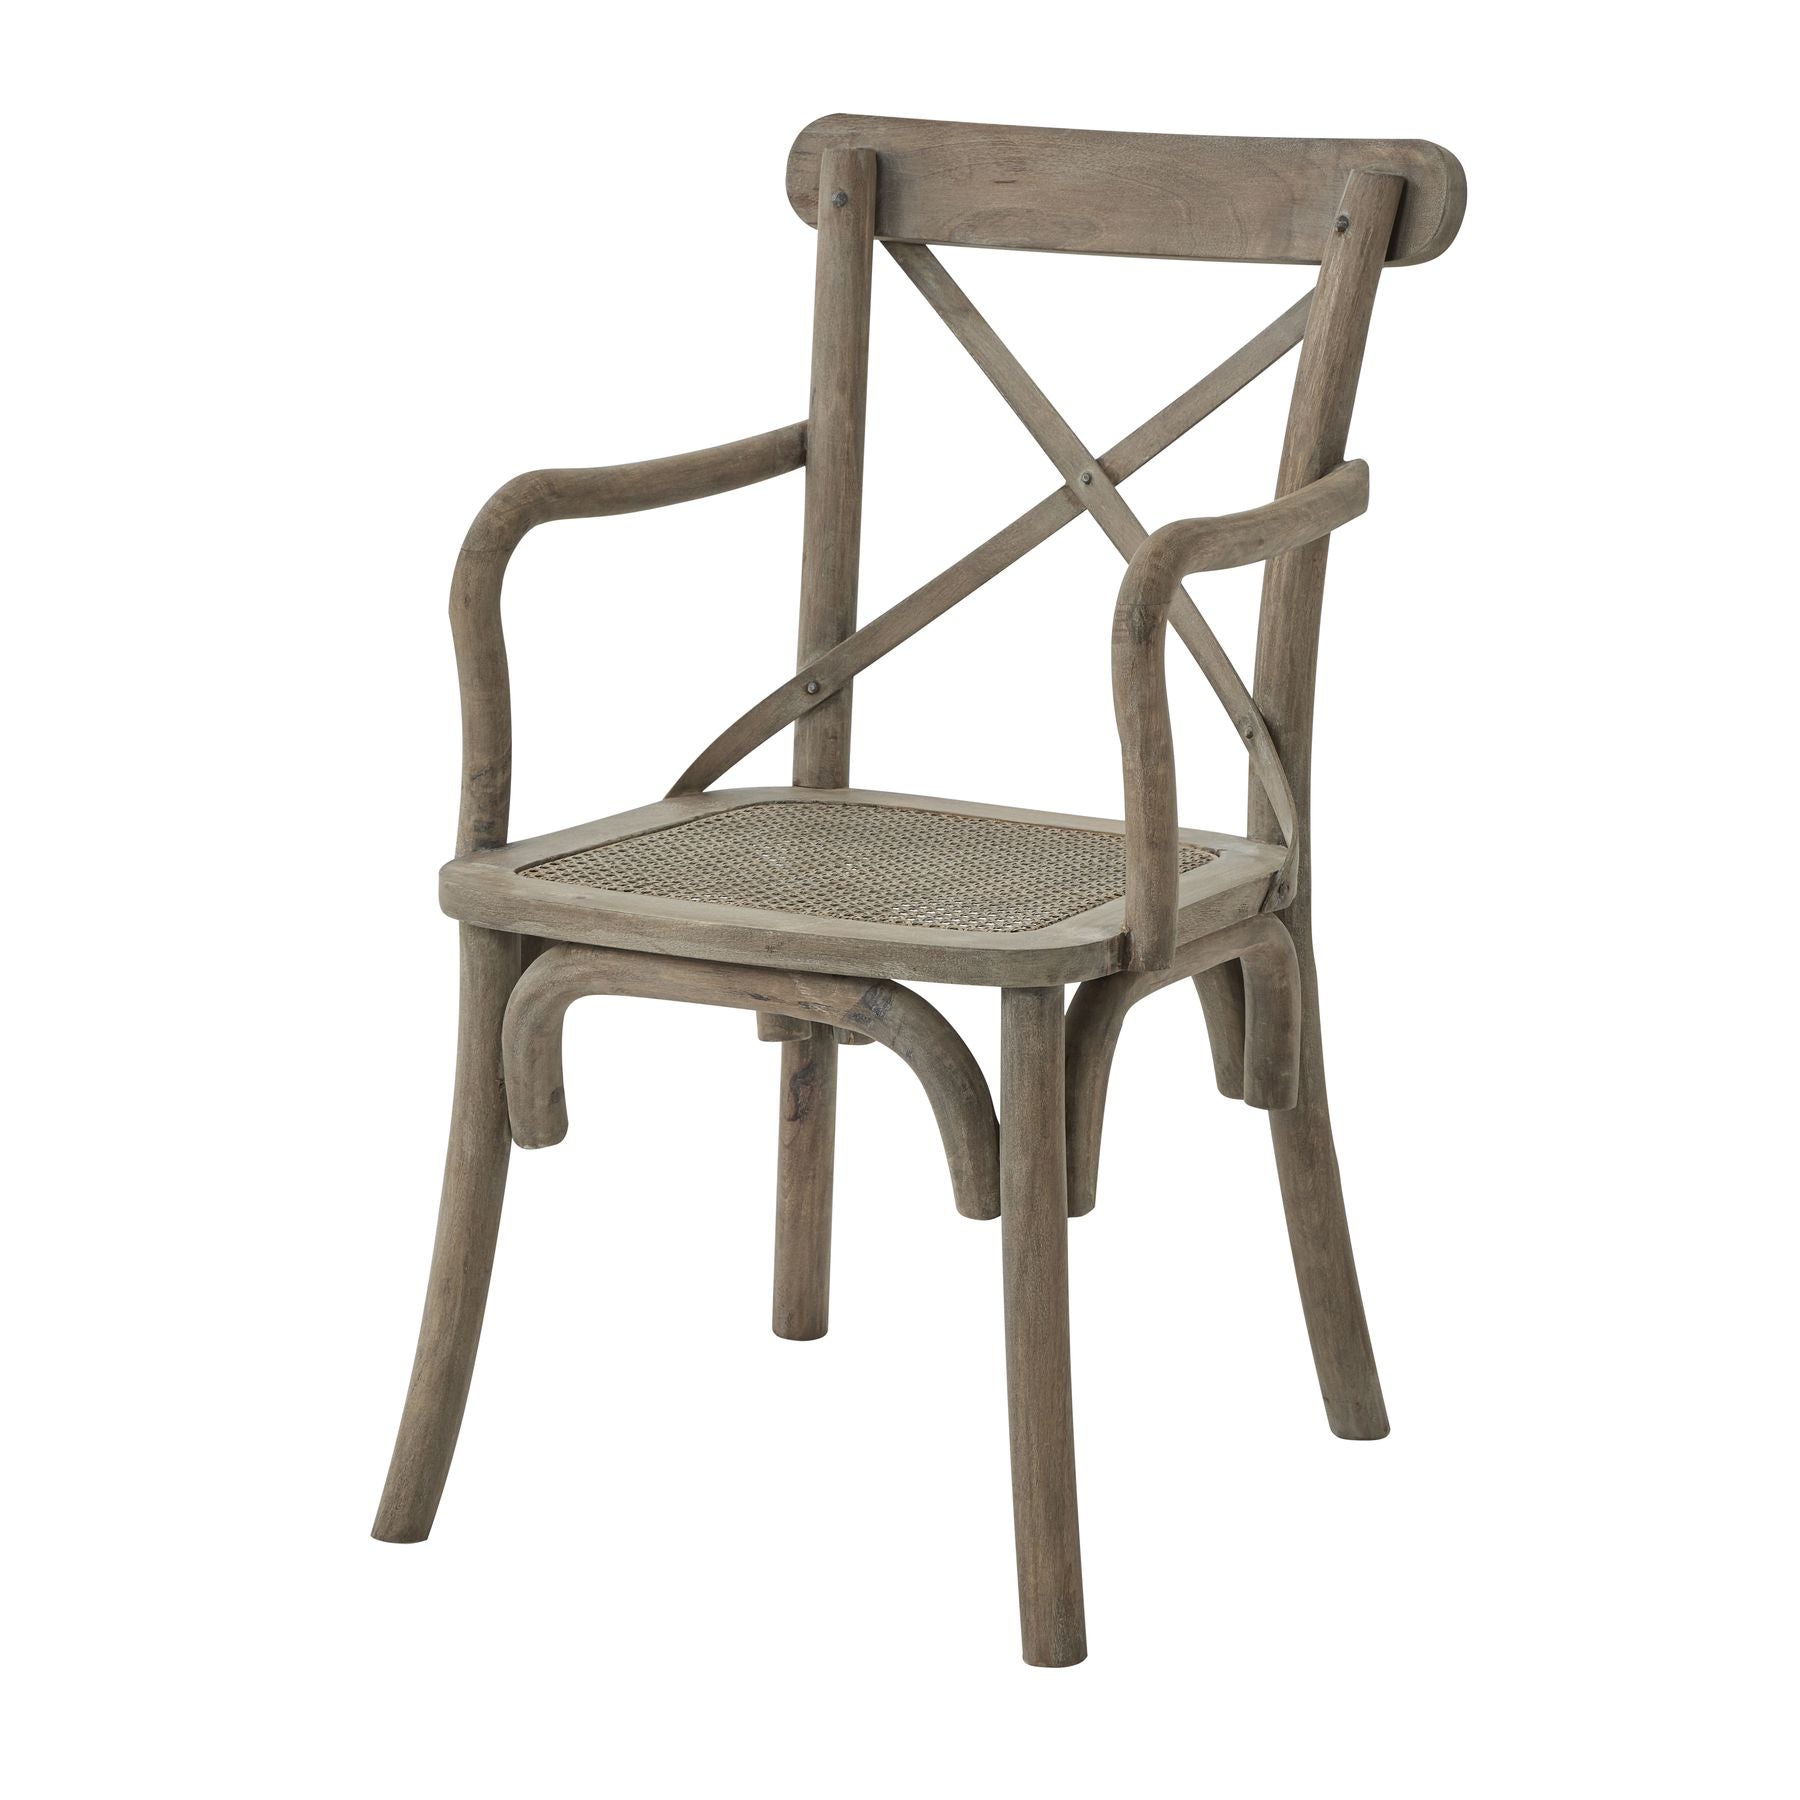 View Copgrove Collection Cross Back Carver Chair With Rush Seat information